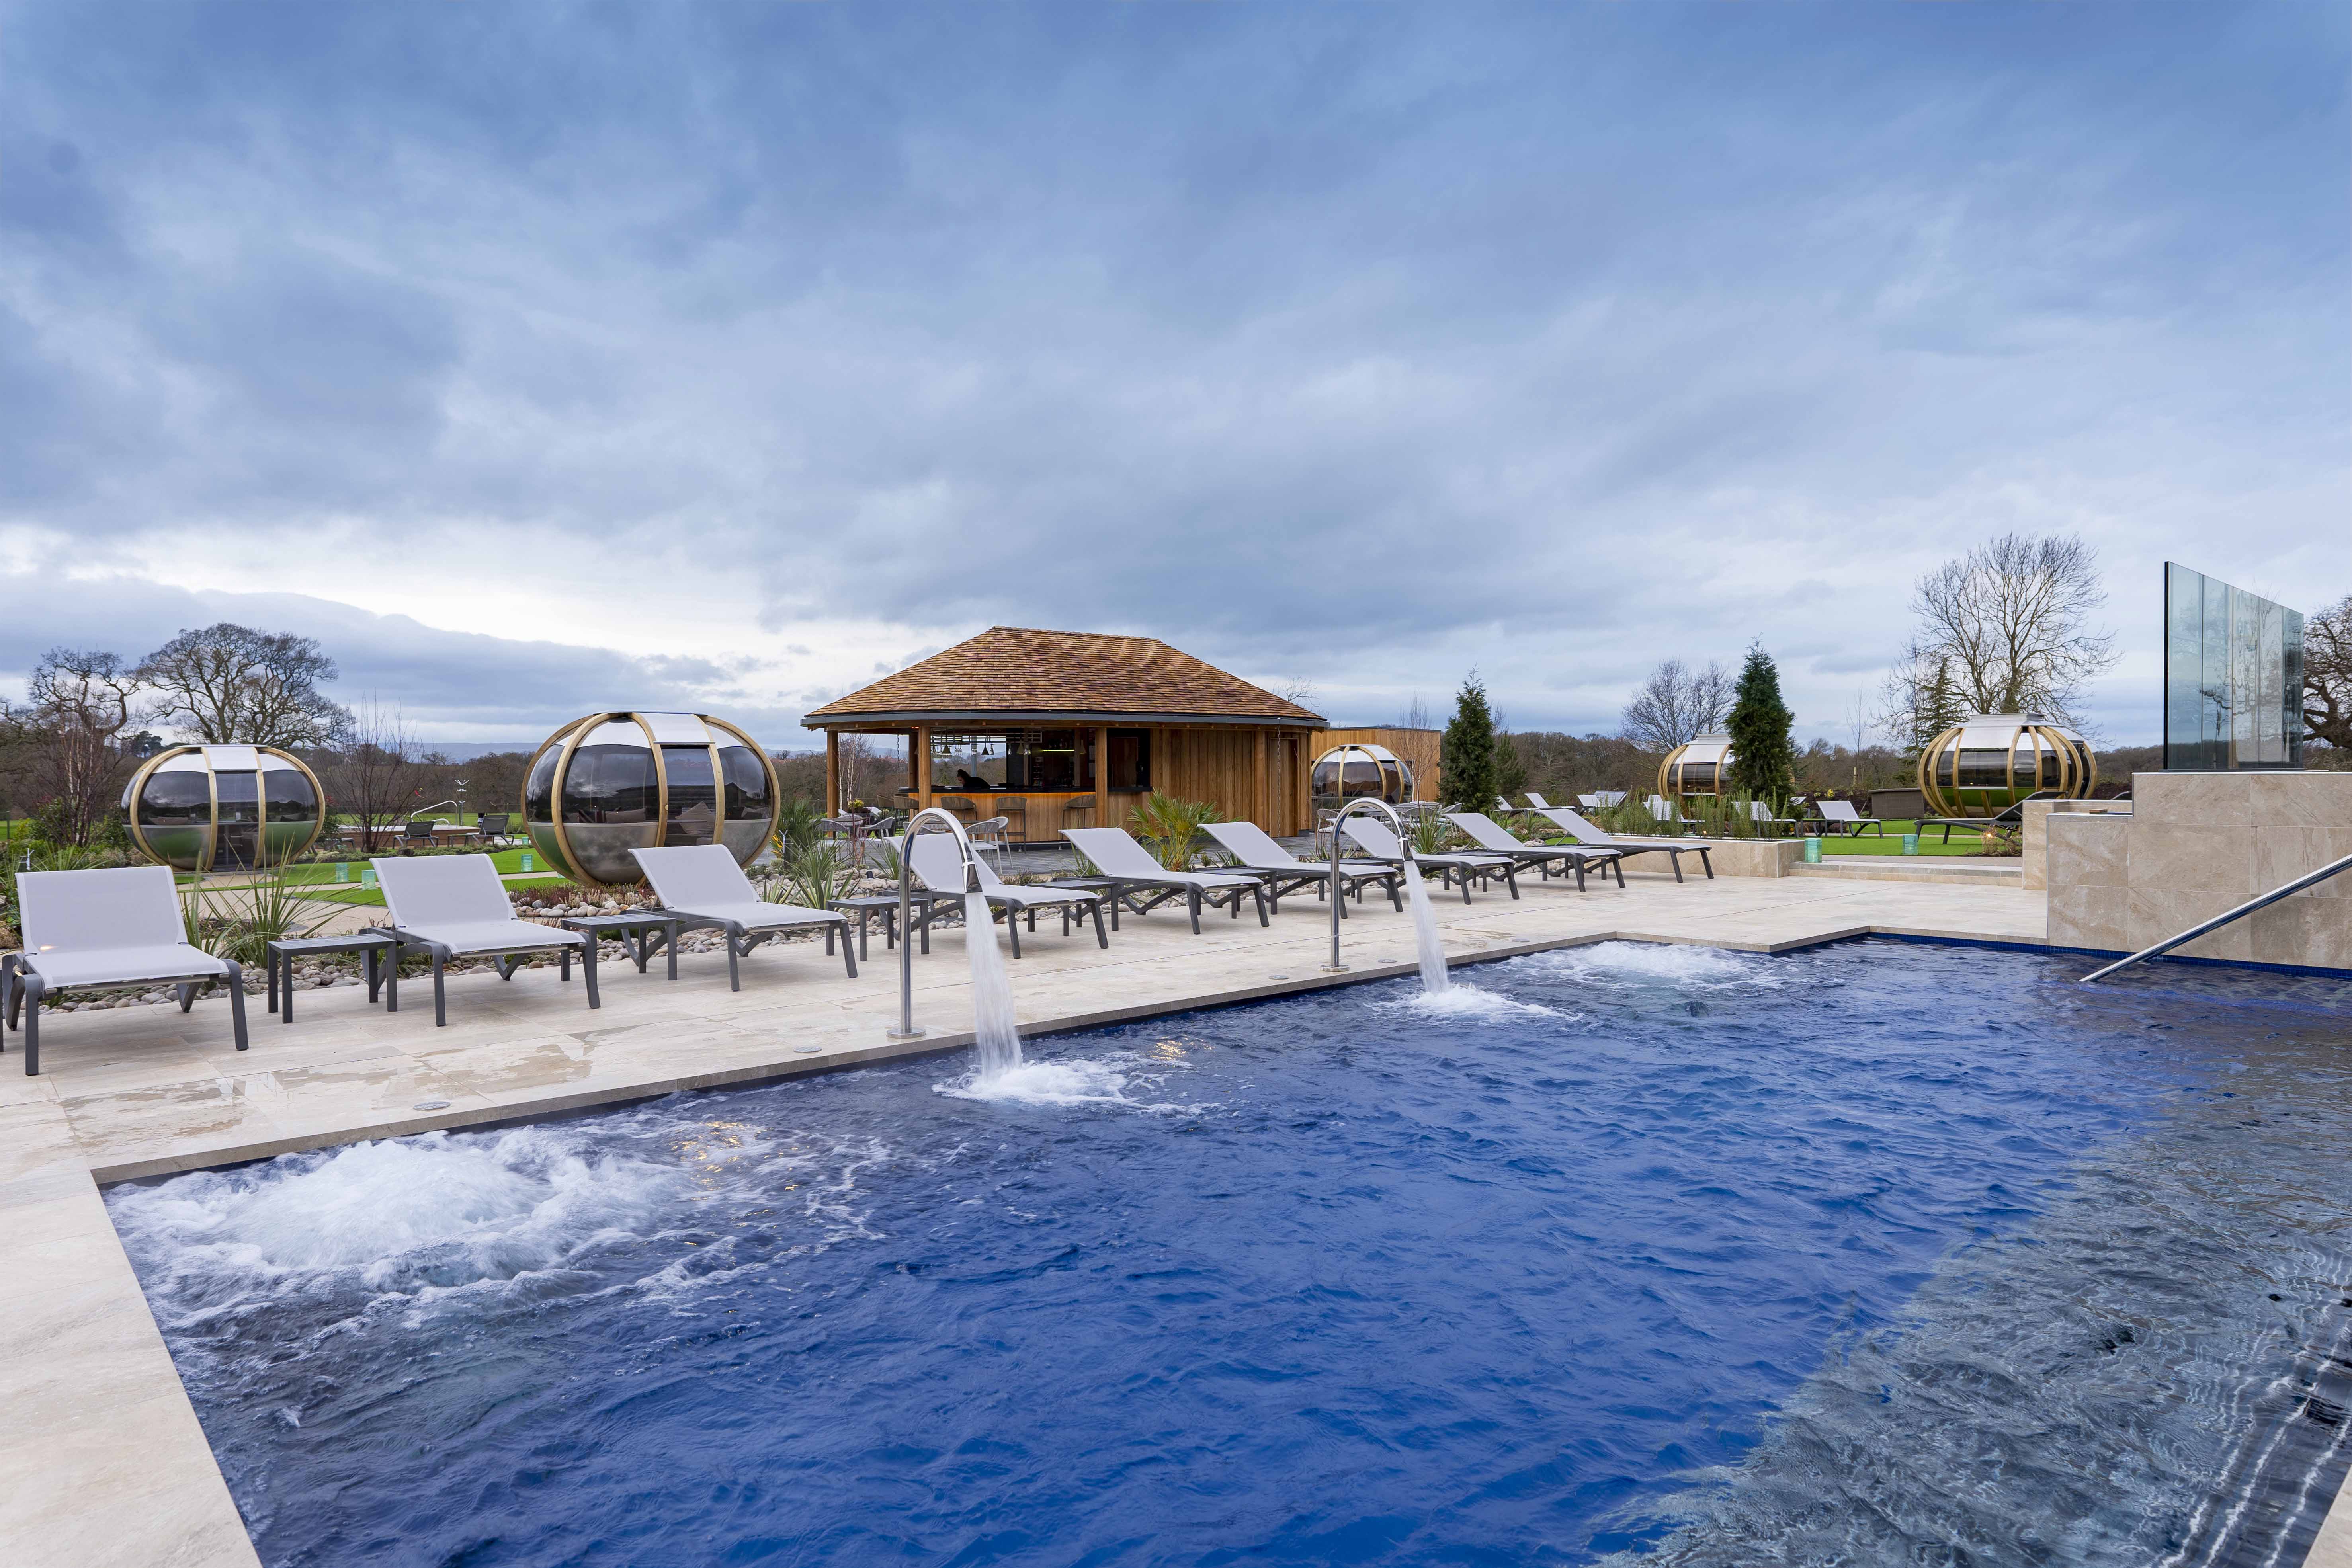 Carden Park golf and spa hotel in cheshire, england